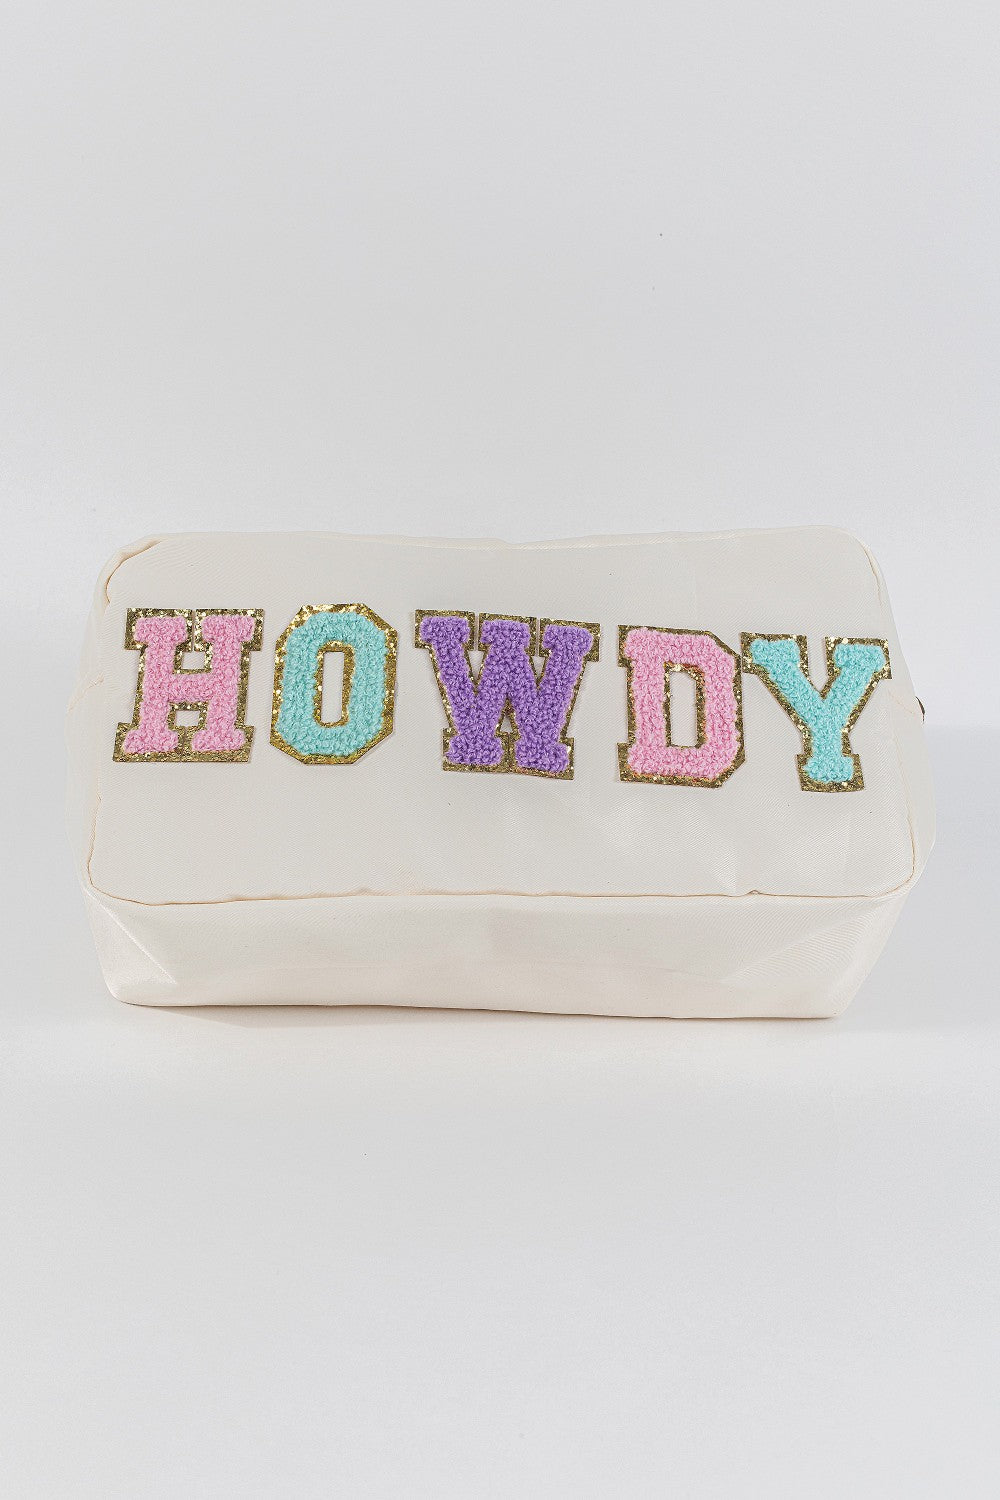 The HOWDY Pouch